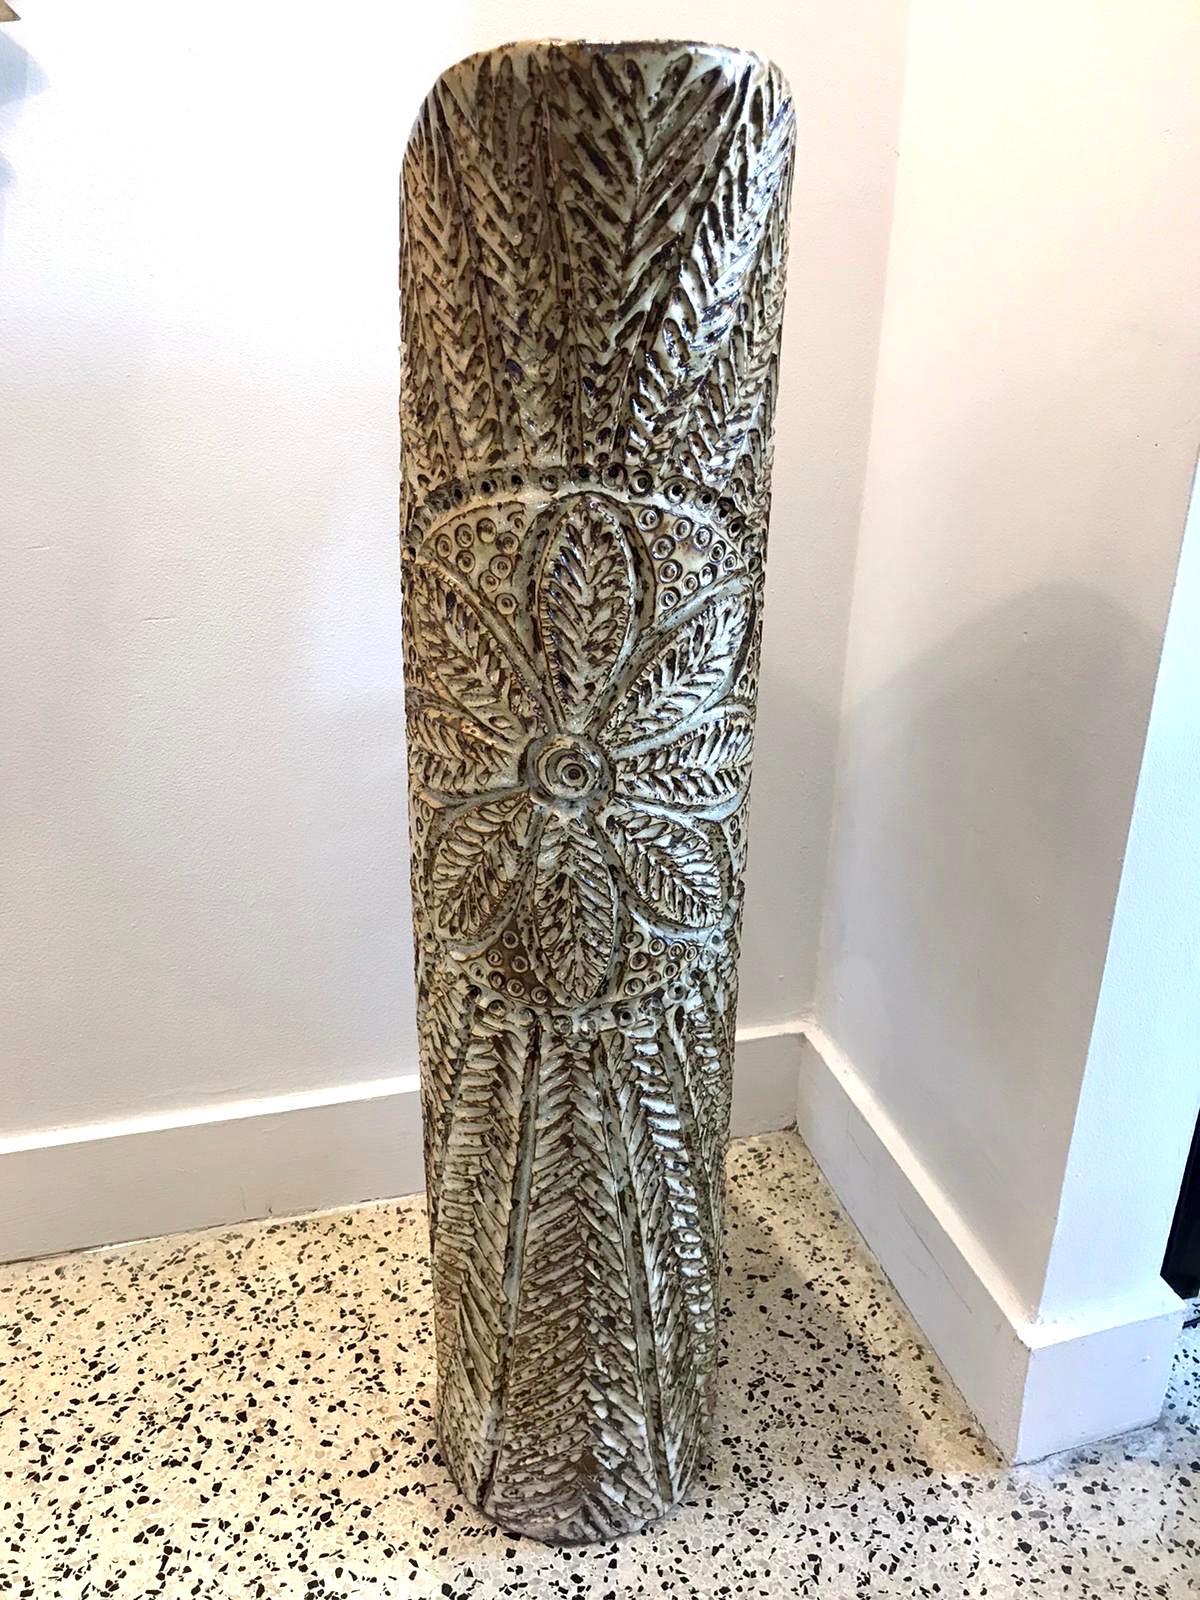 Glazed earthenware made in Italy (stamped to bottom) this huge natural earth tones piece has a carved texture and very important. Rarely seen one so tall.